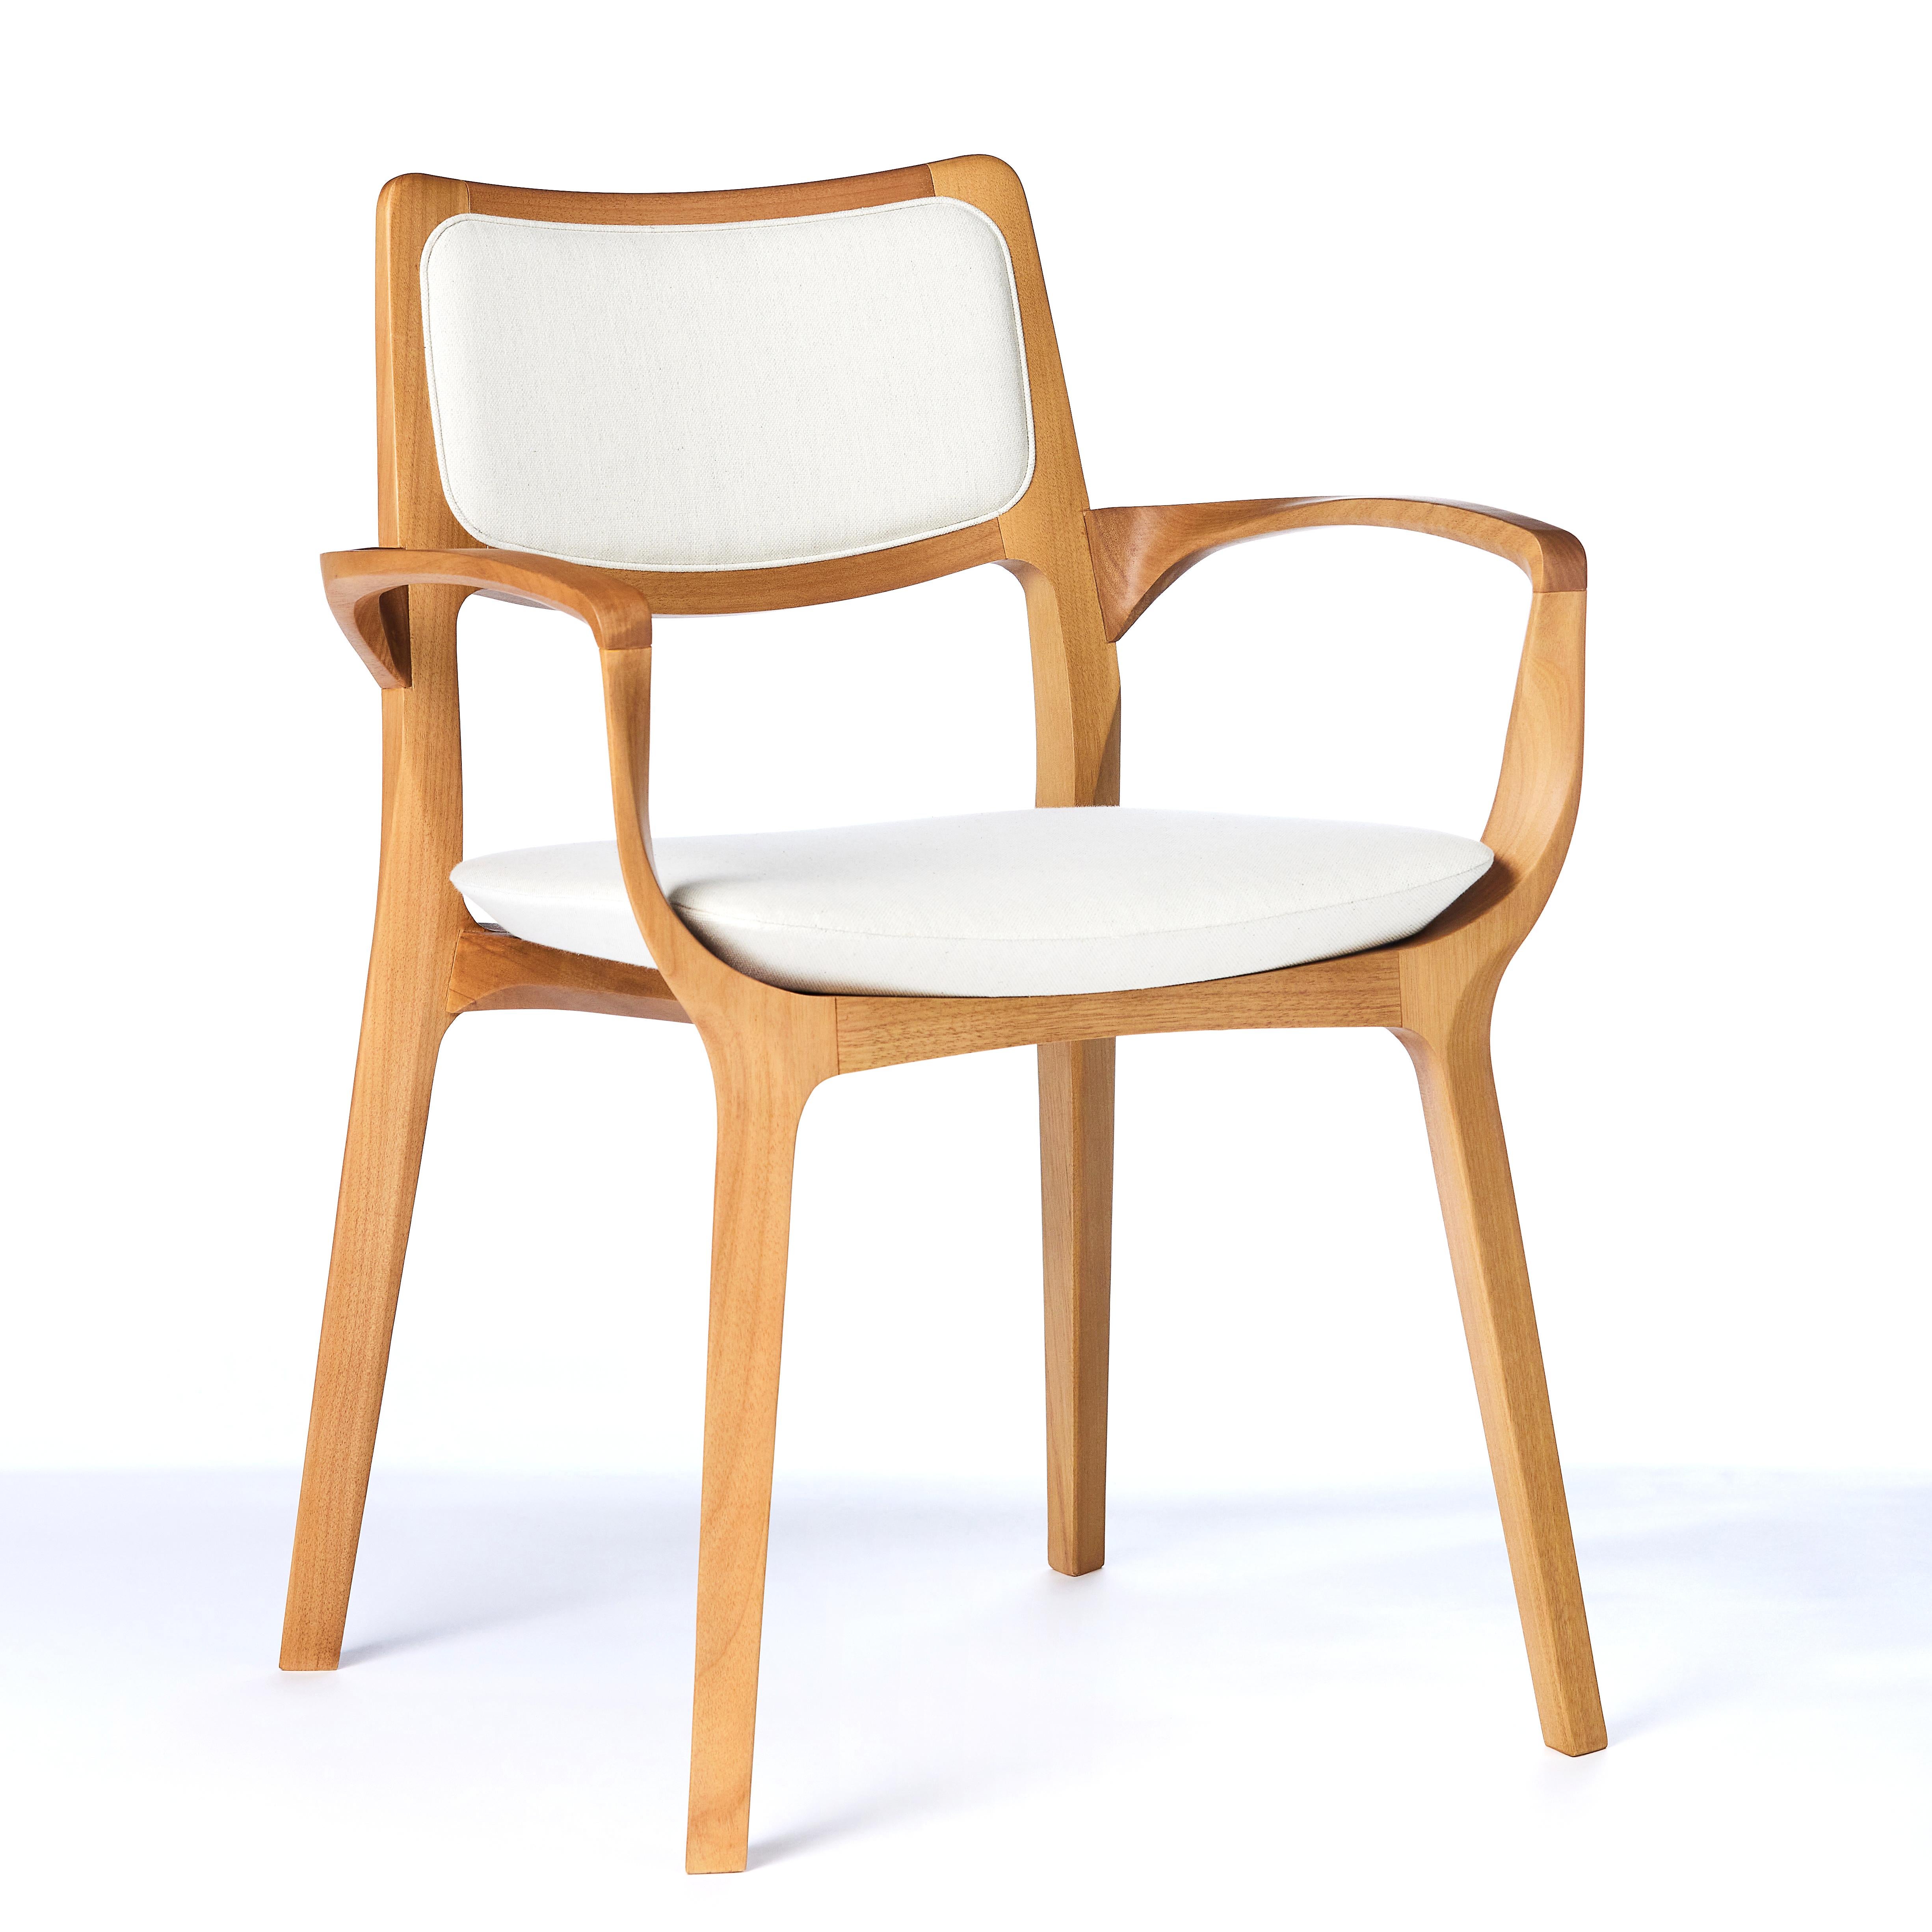 Modern Style Aurora Chair Sculpted in Walnut Finish No Arms, leather seating For Sale 2